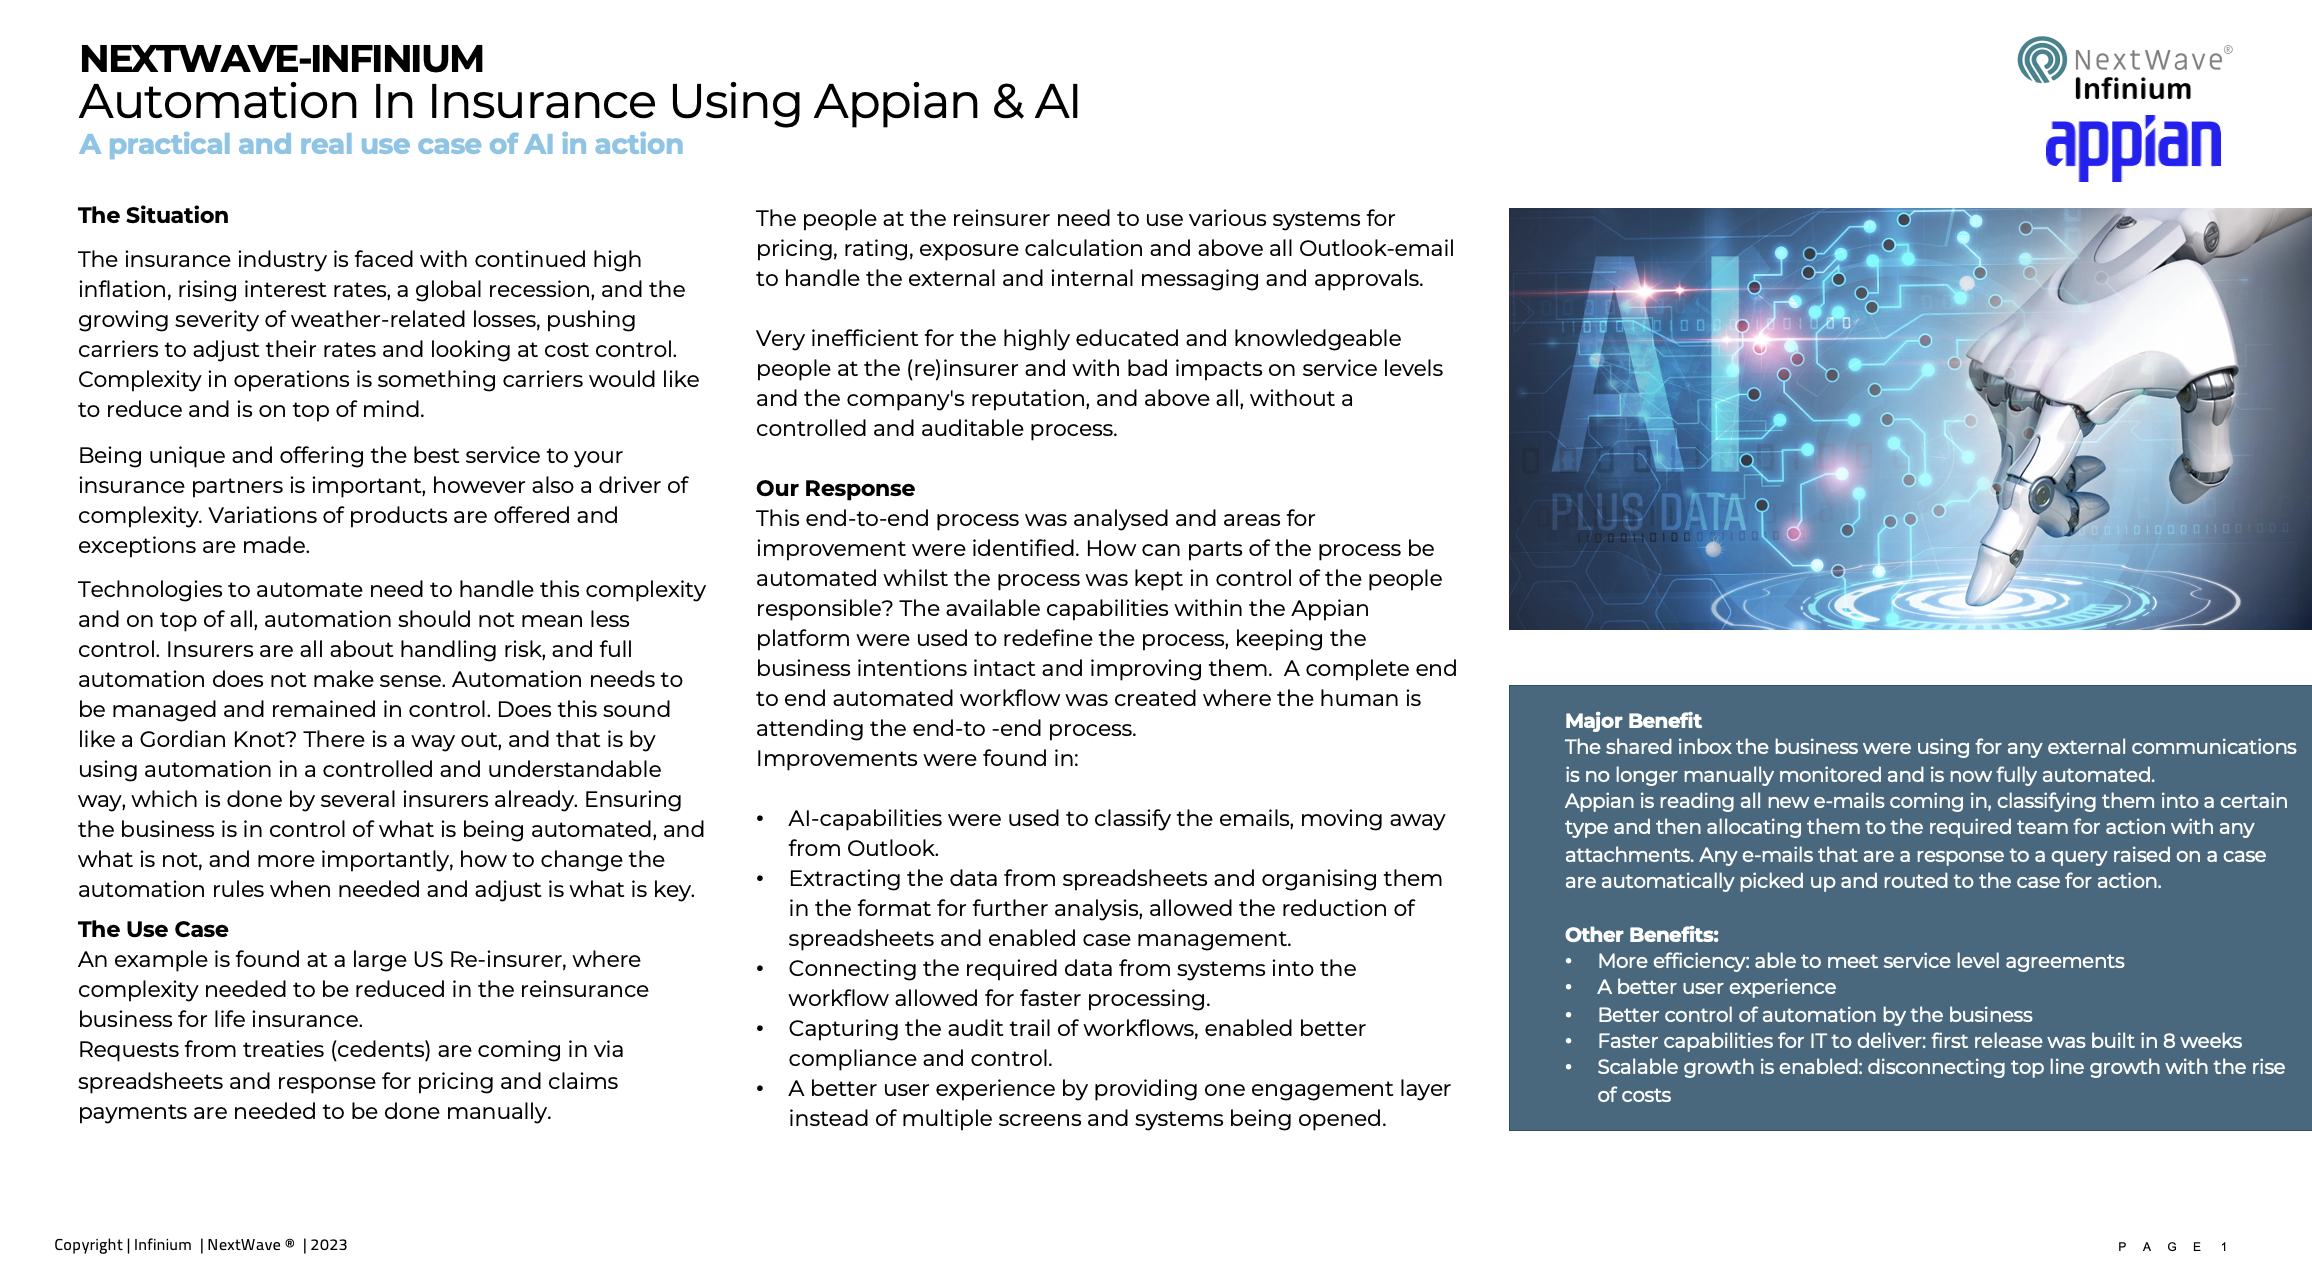 Automation in insurance using Appian & AI